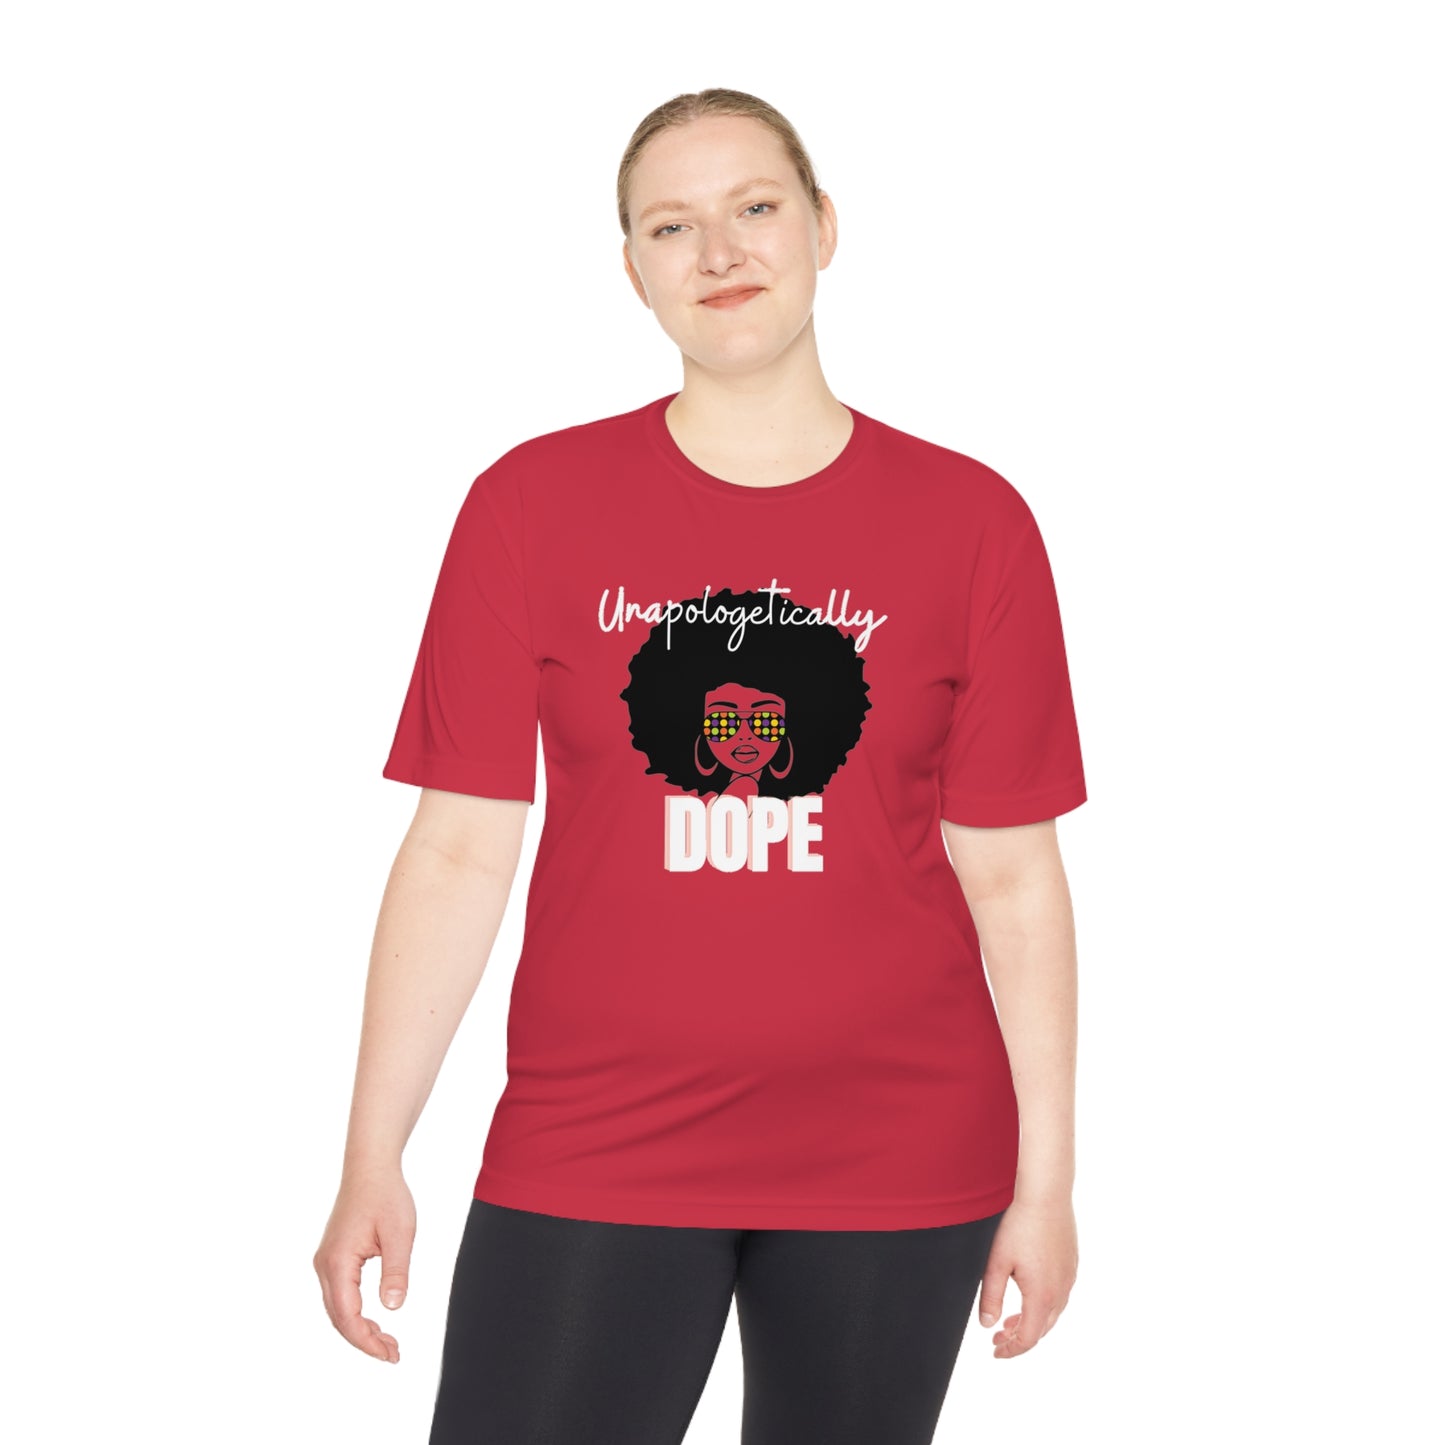 Unapologetically DOPE/Glasses Unisex Moisture Wicking Tee